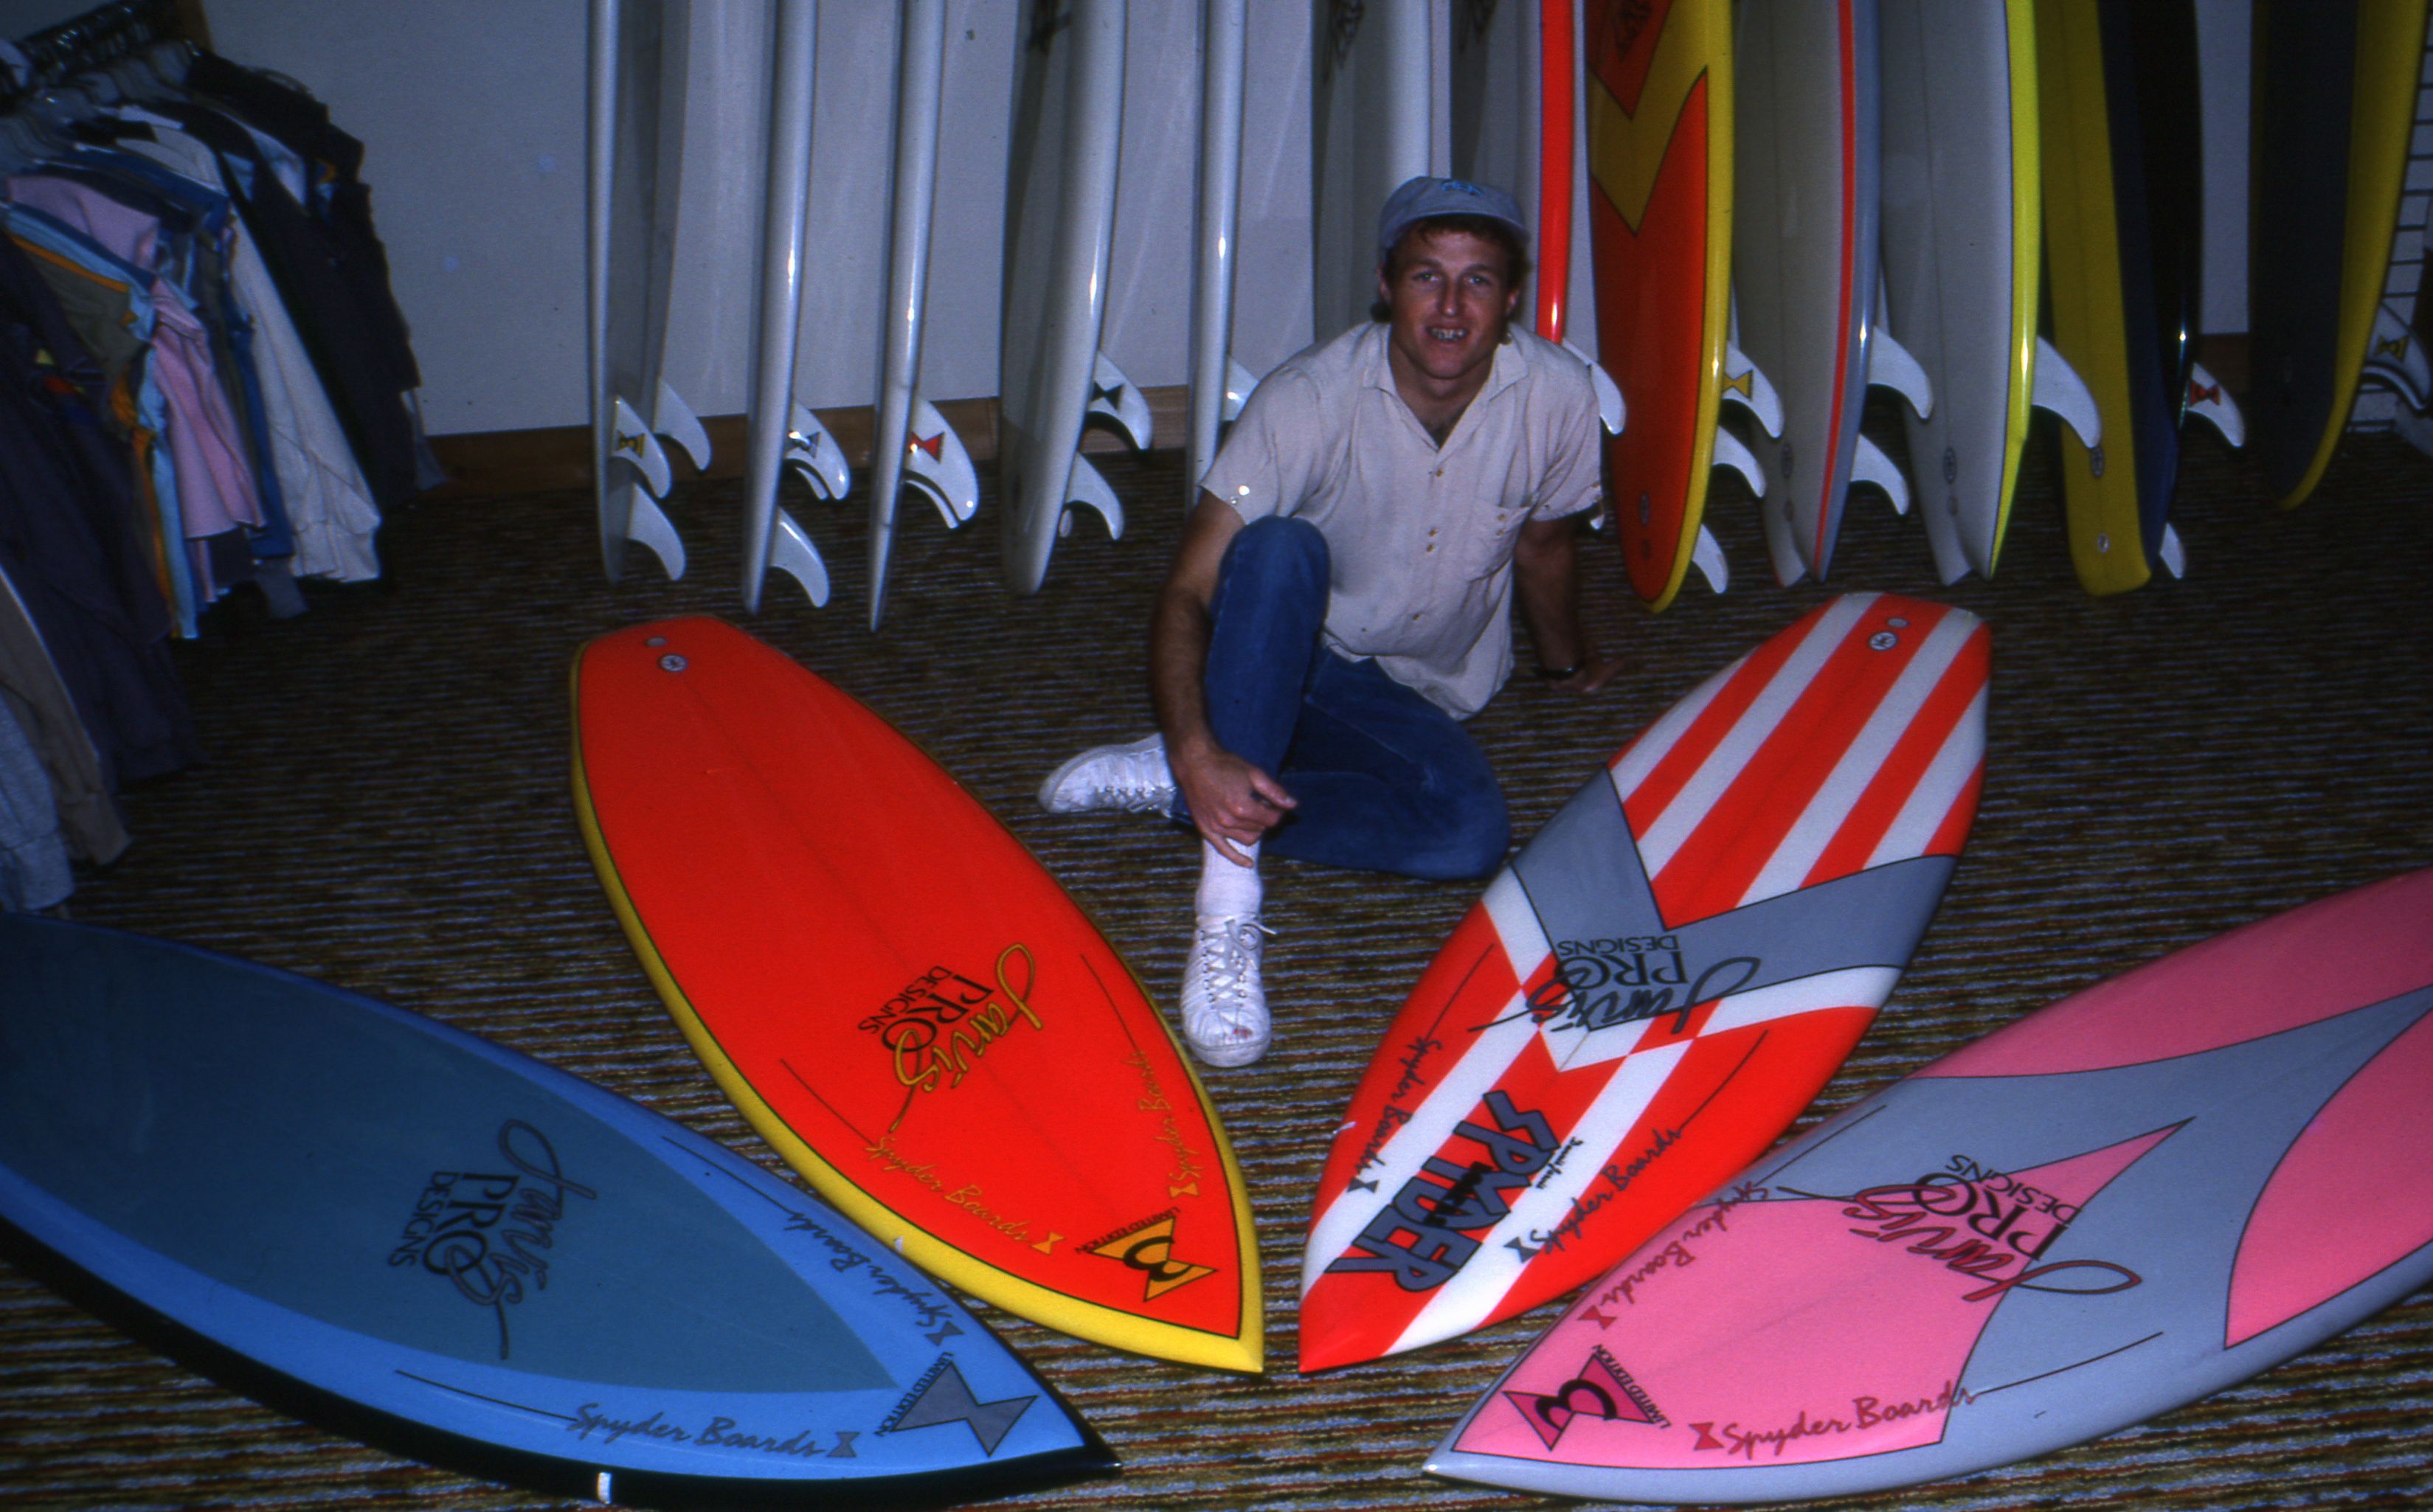 INTERVIEW WITH DENNIS JARVIS OF SPYDER SURFBOARDS